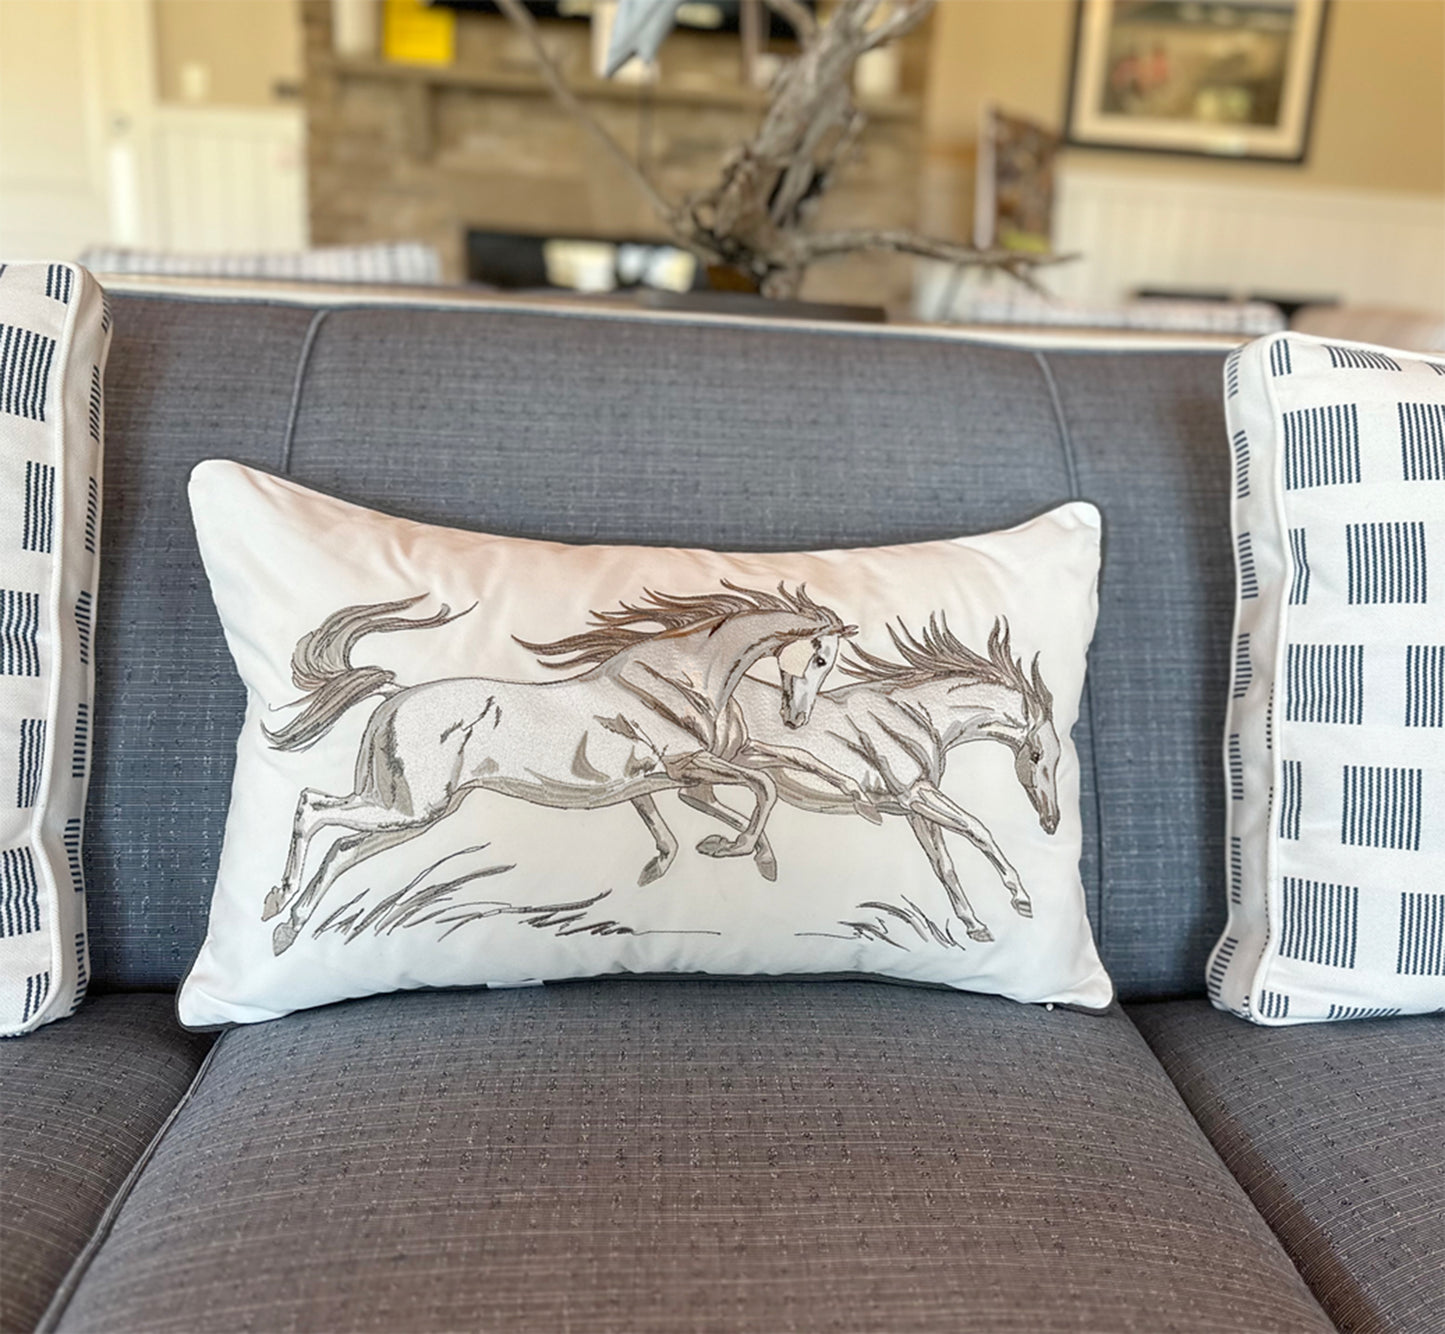 Equine Frolic Lumbar pillow styled on a gray couch.